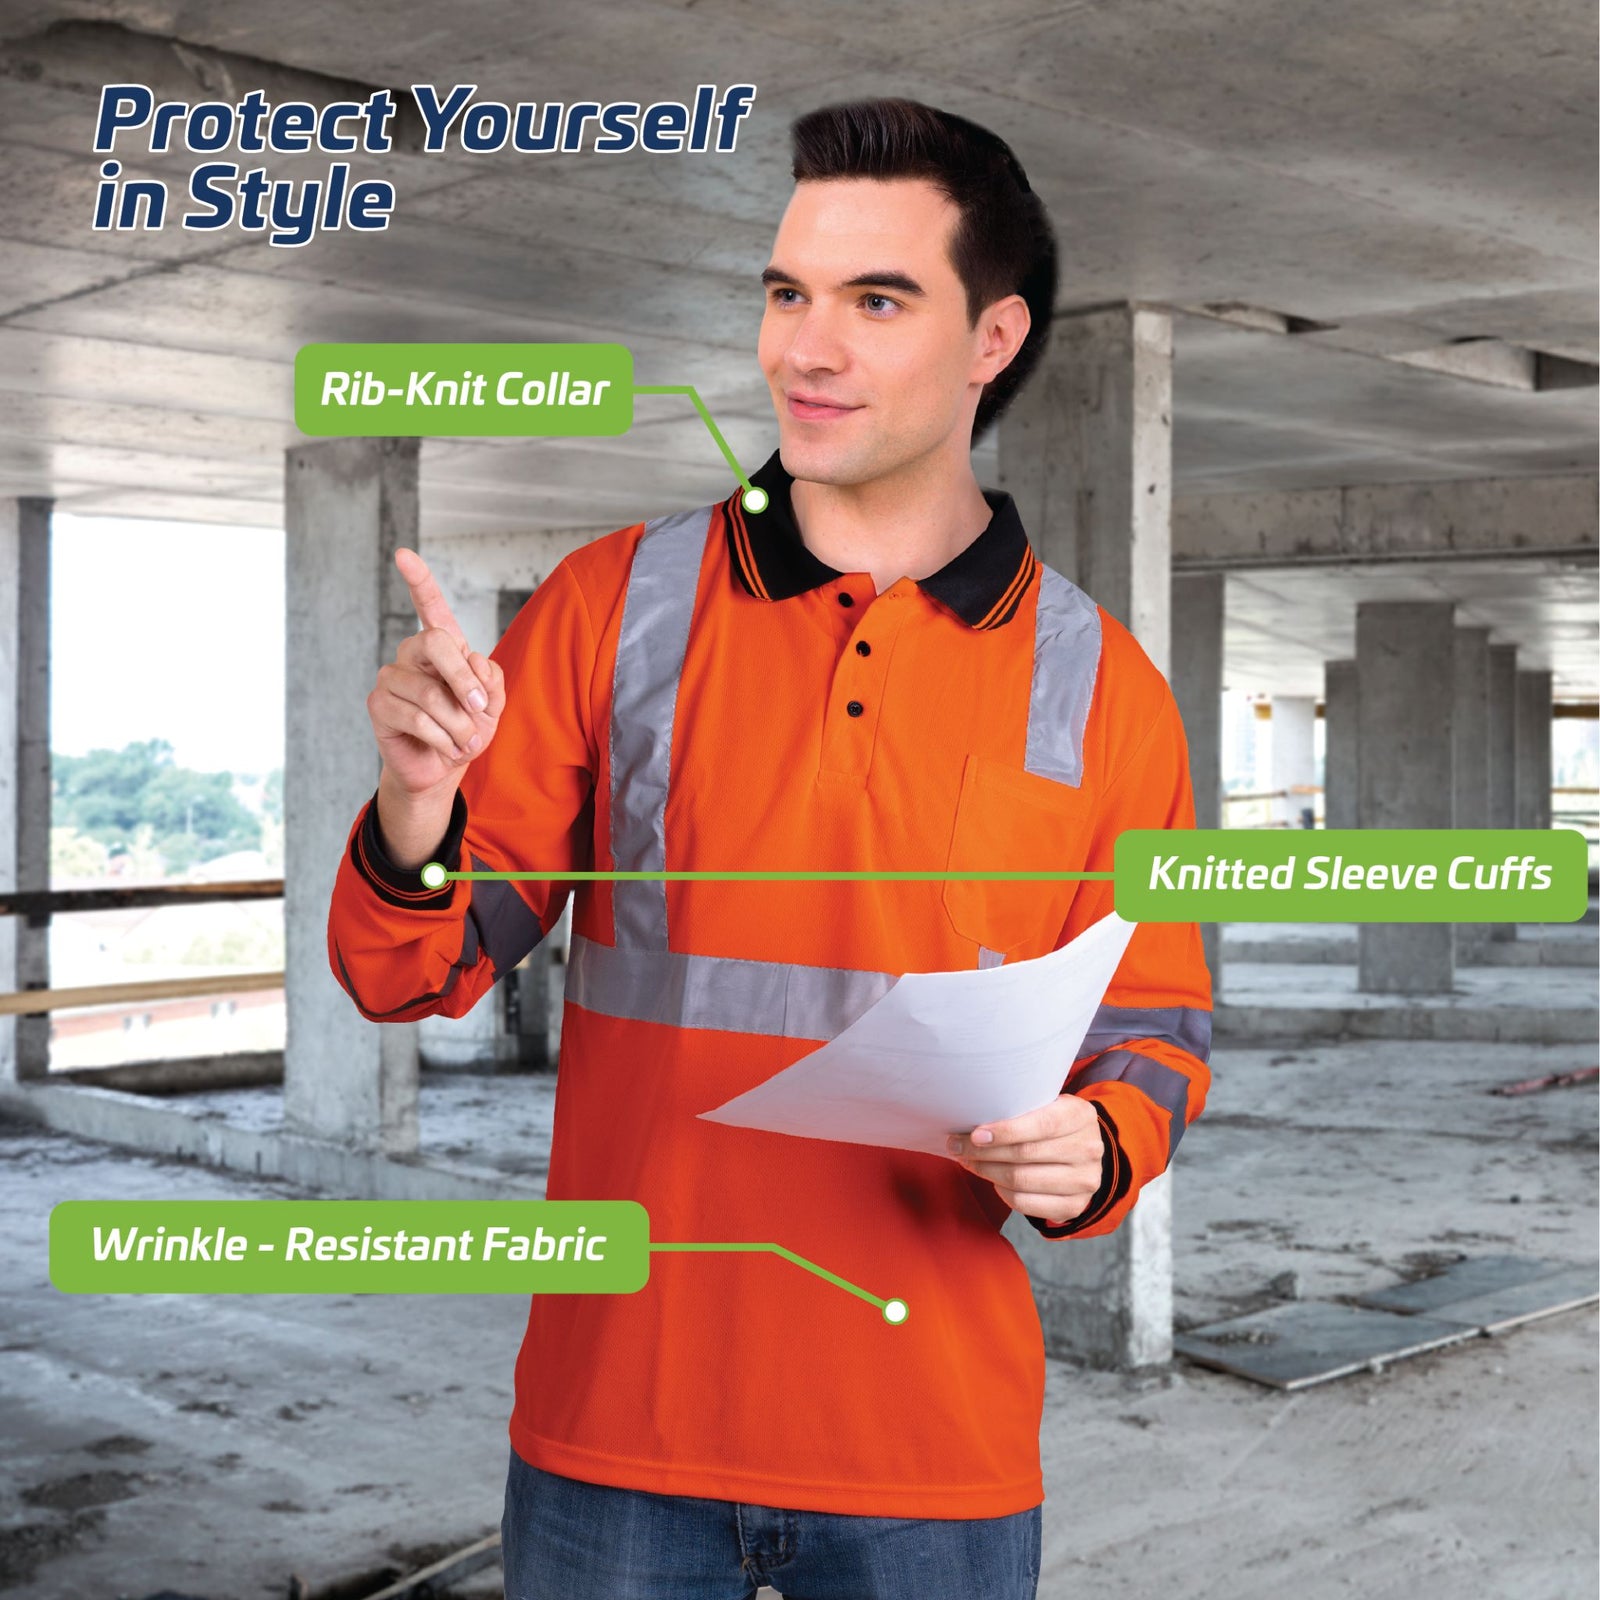 Worker wearing personal protection equipment and a long sleeve hi visibility orange safety shirt. Features of shirt read: Protect yourself in style, rib knit collar, knitted sleeve cuffs, wrinkle resistant fabric